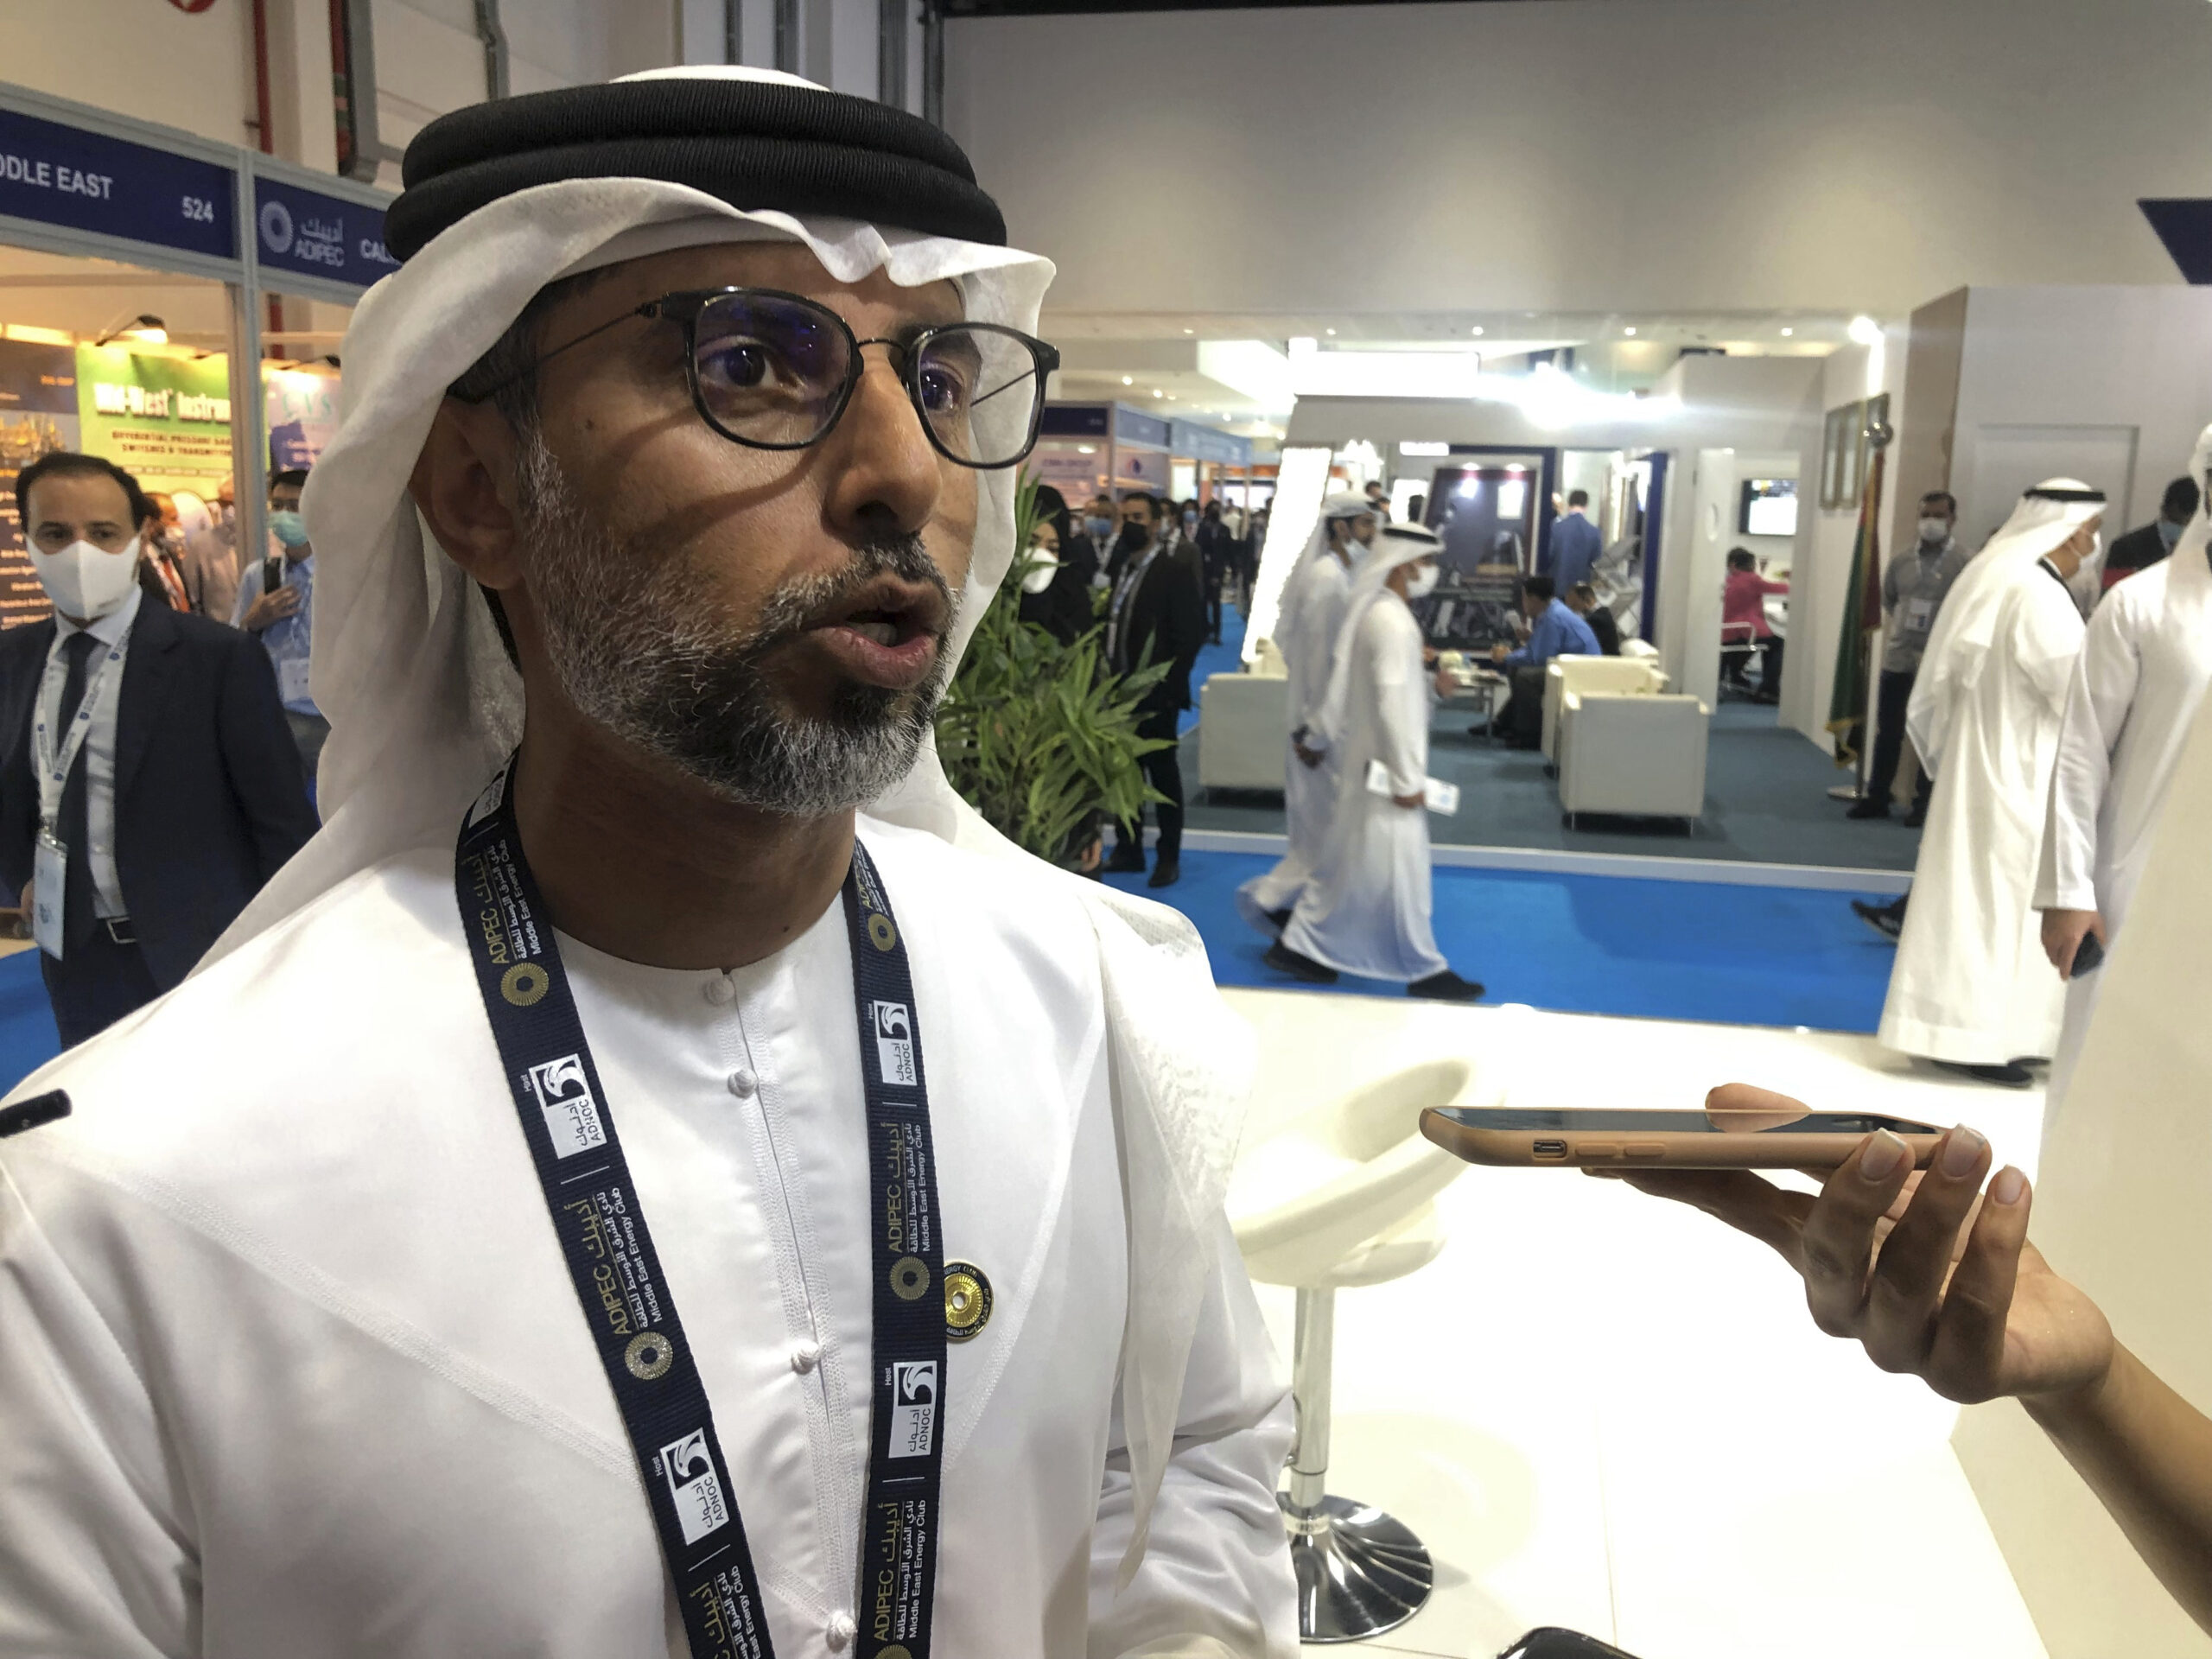 UAE warns reporters to avoid ‘offensive’ news stories at climate talks